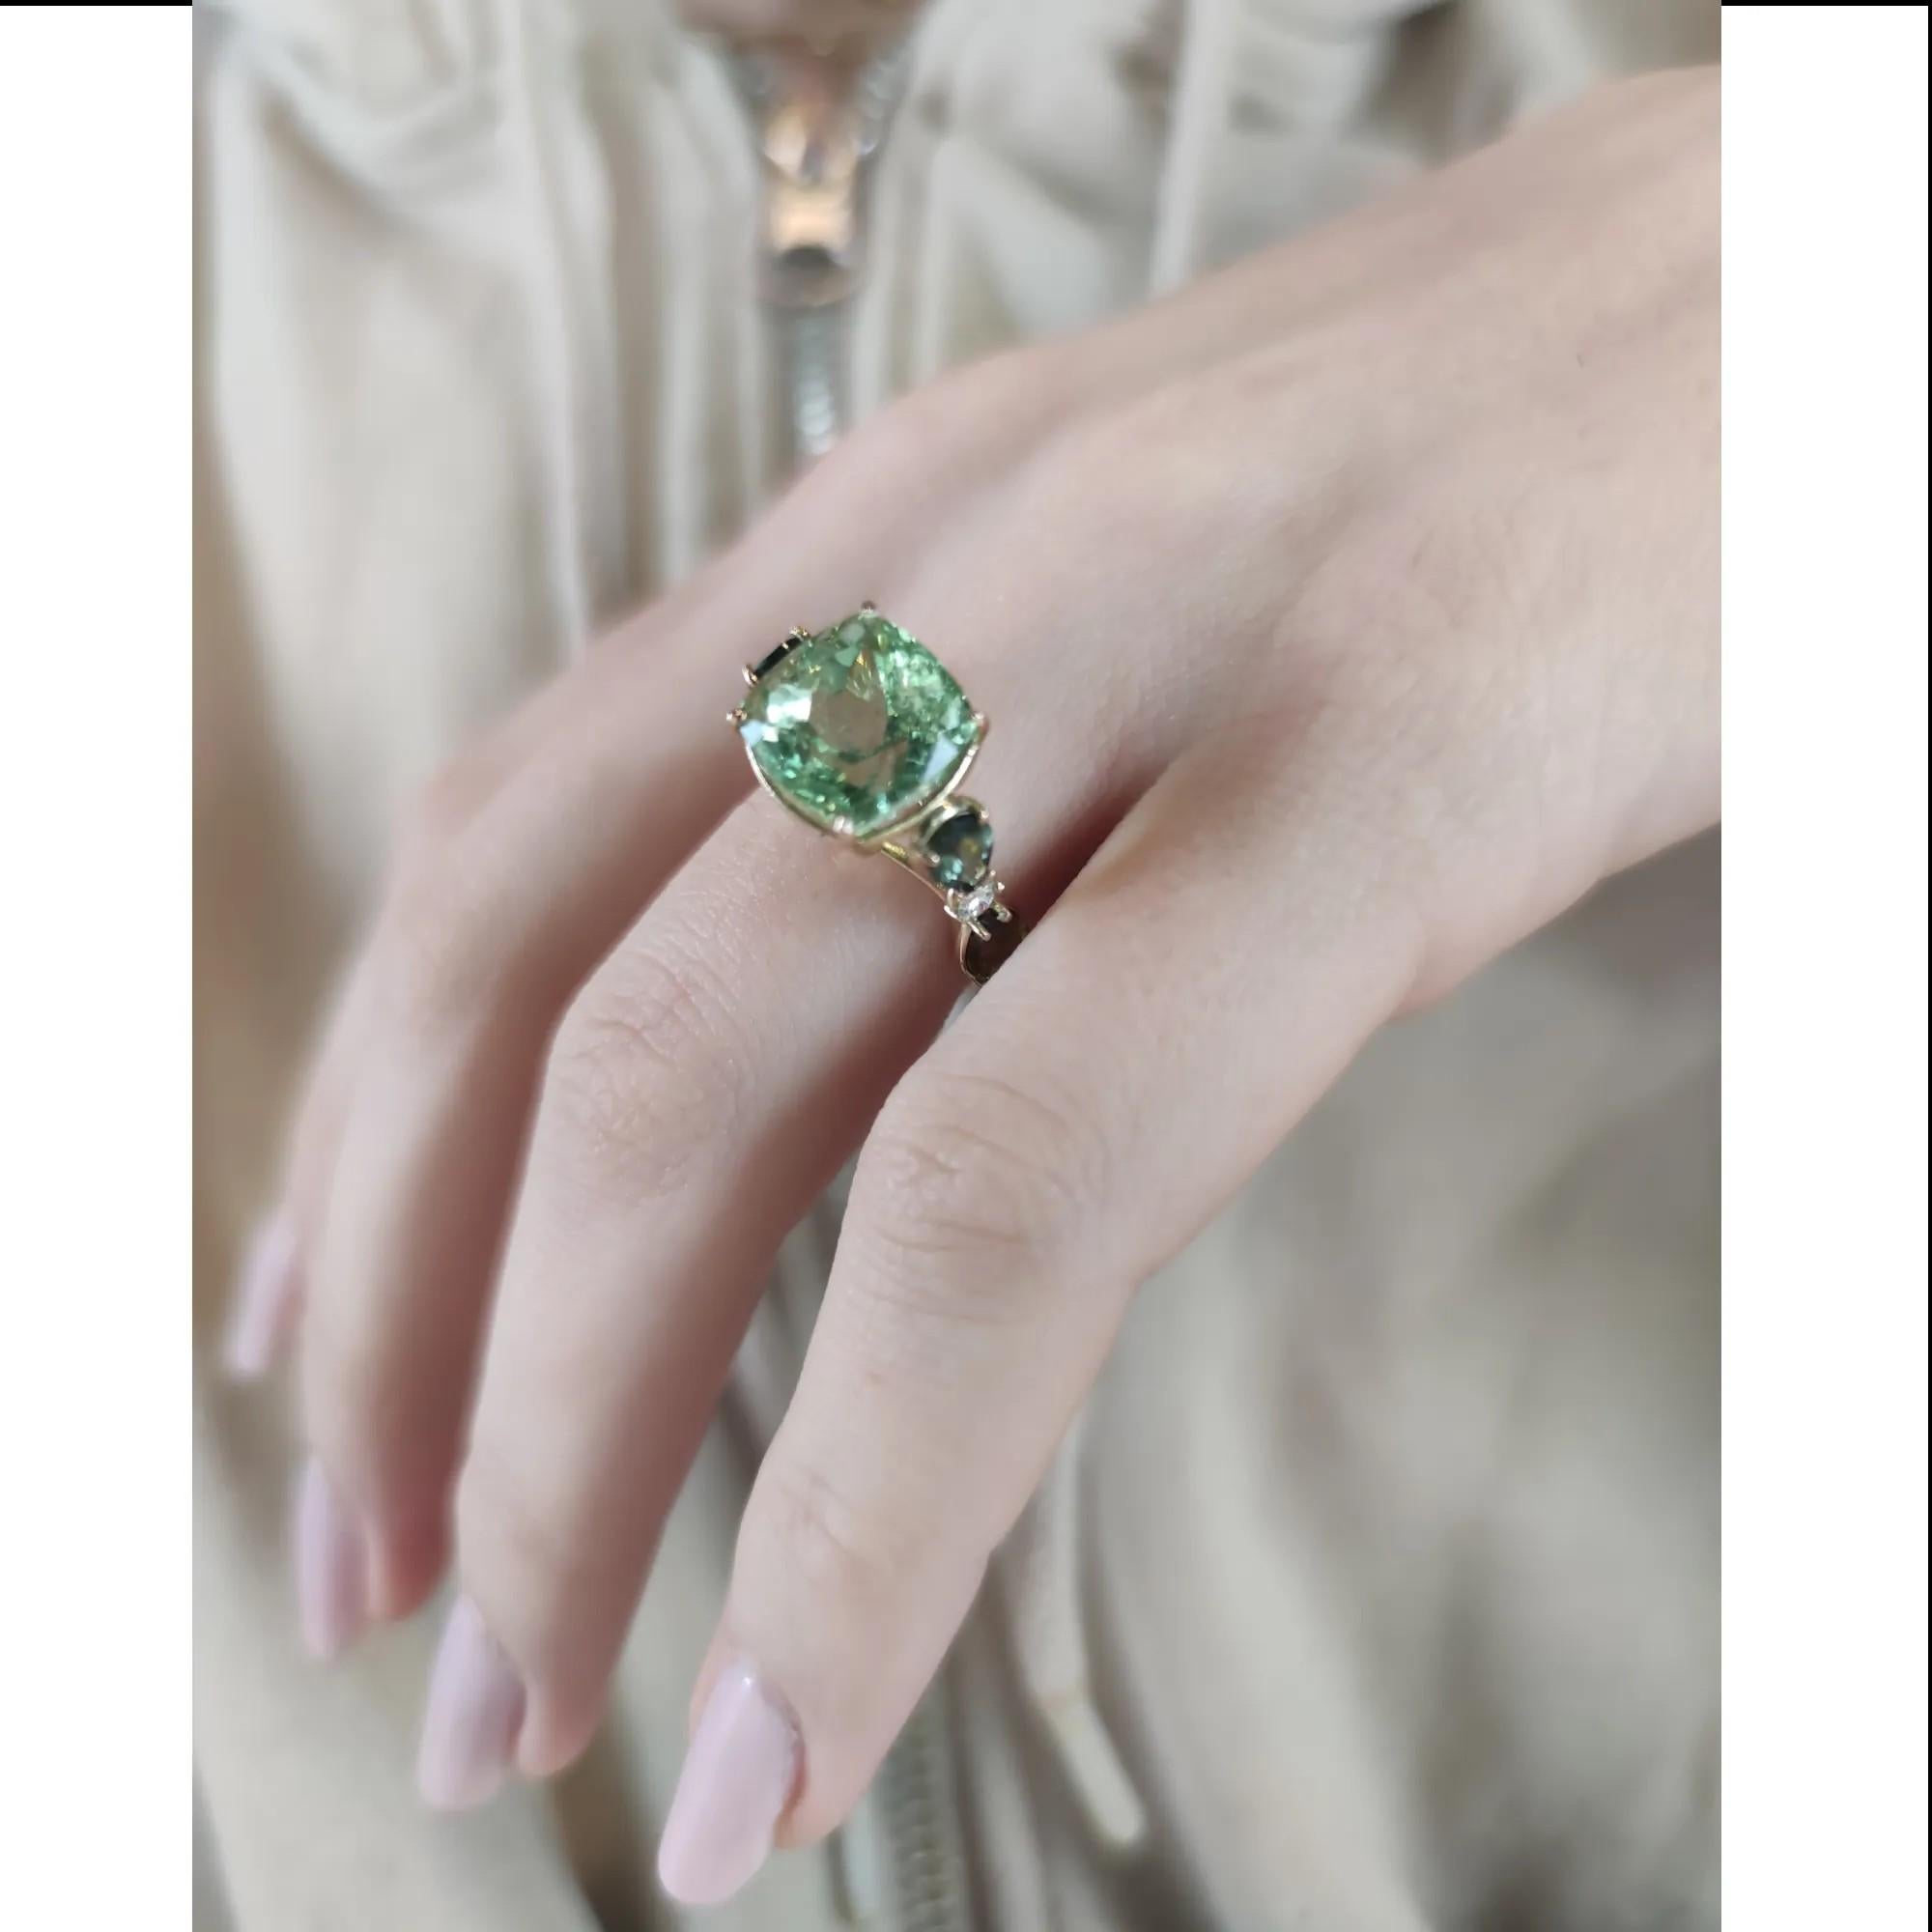 The 14 Karat Yellow Gold Ring is a unique, handcrafted jewelry piece with the following technical details:

SIZE:
To look at the photos with the scale ruler
-American Size:6.75
-European Size:14
  
Gemstones:
- One green tourmaline.
- Highly